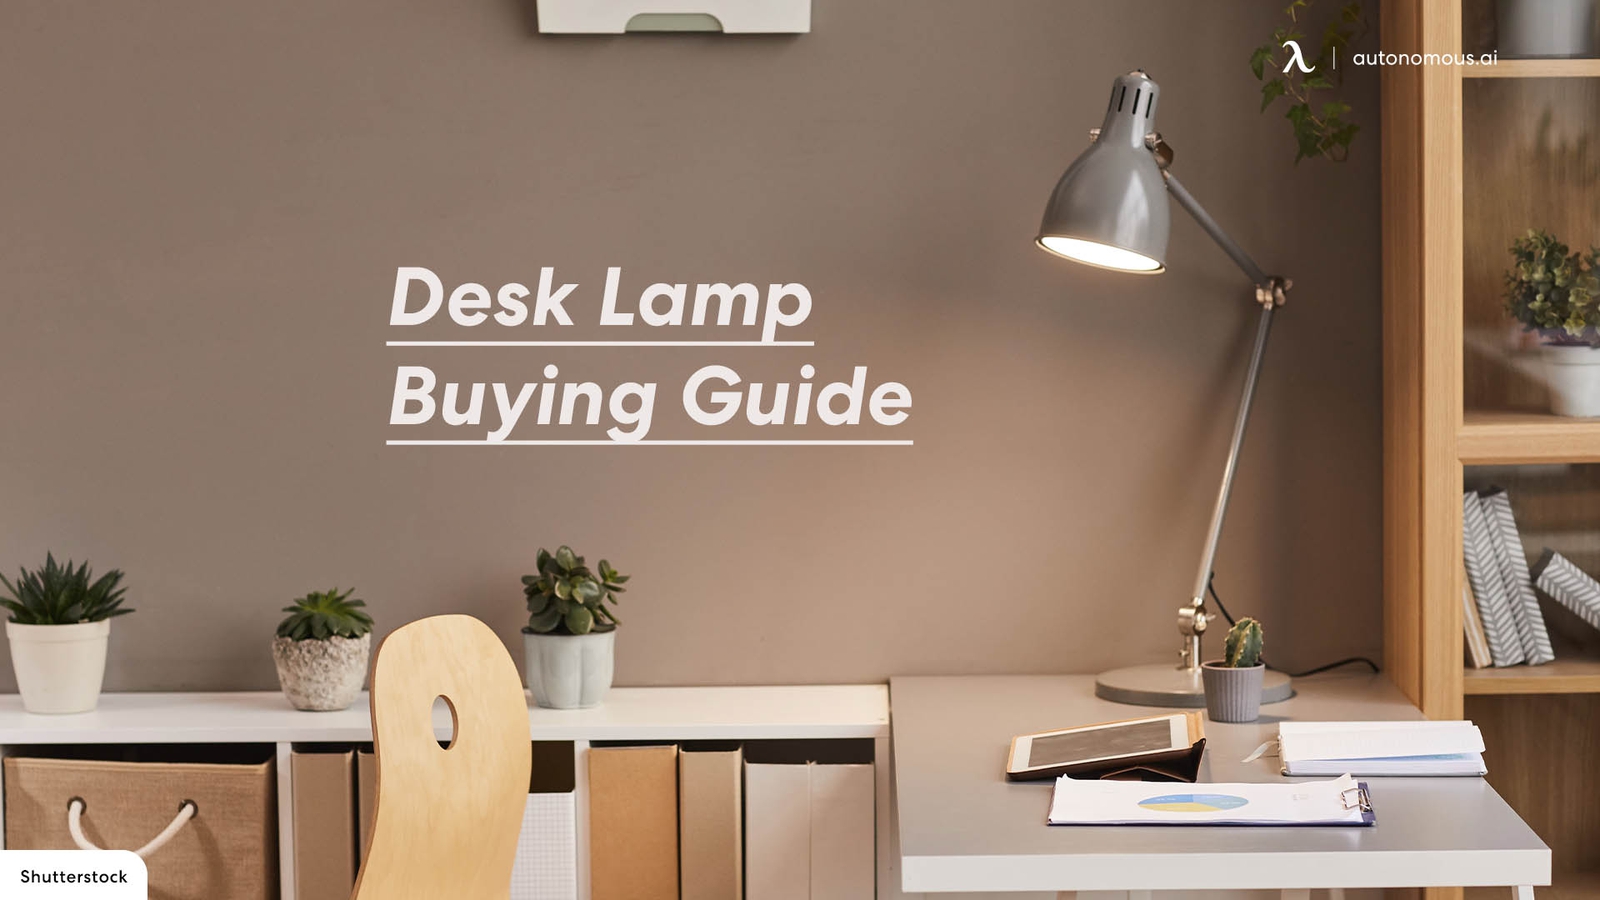 Desk Lamp Buying Guide: 17 Things You Should Consider